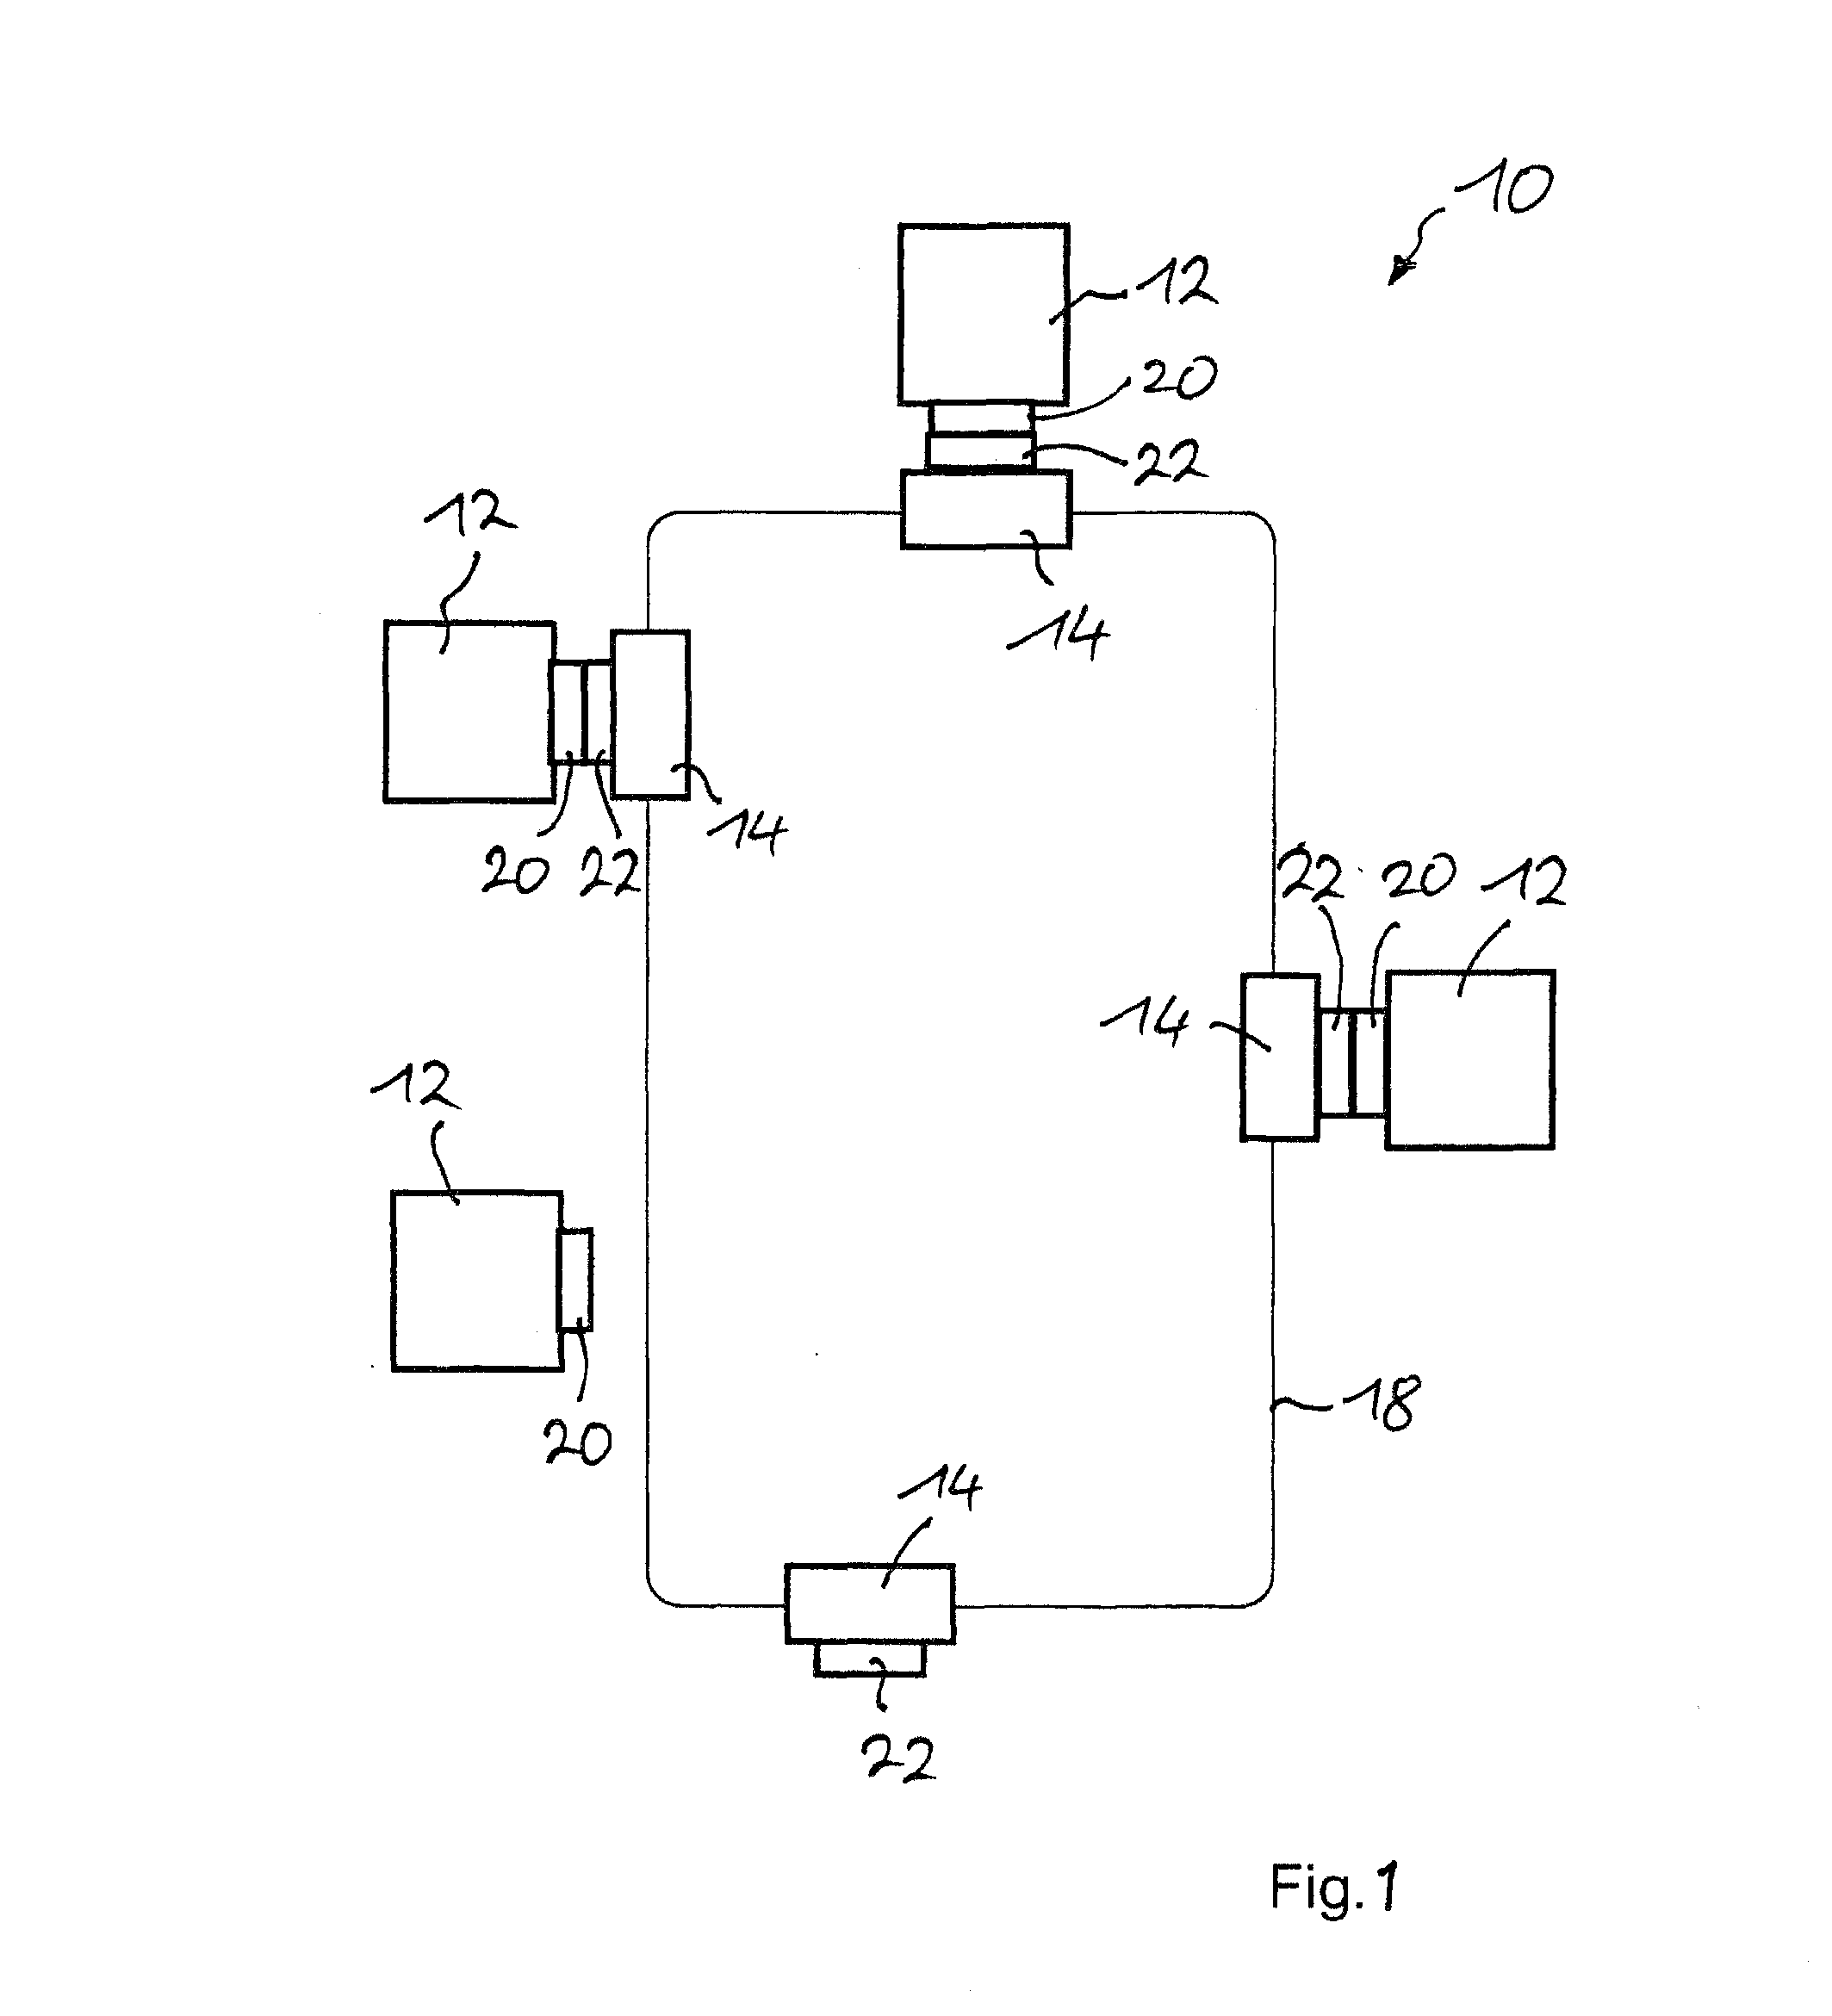 Method for operating an automated guided, mobile assembly and/or material transport unit and automated guided, mobile assembly and/or material transport unit therefor